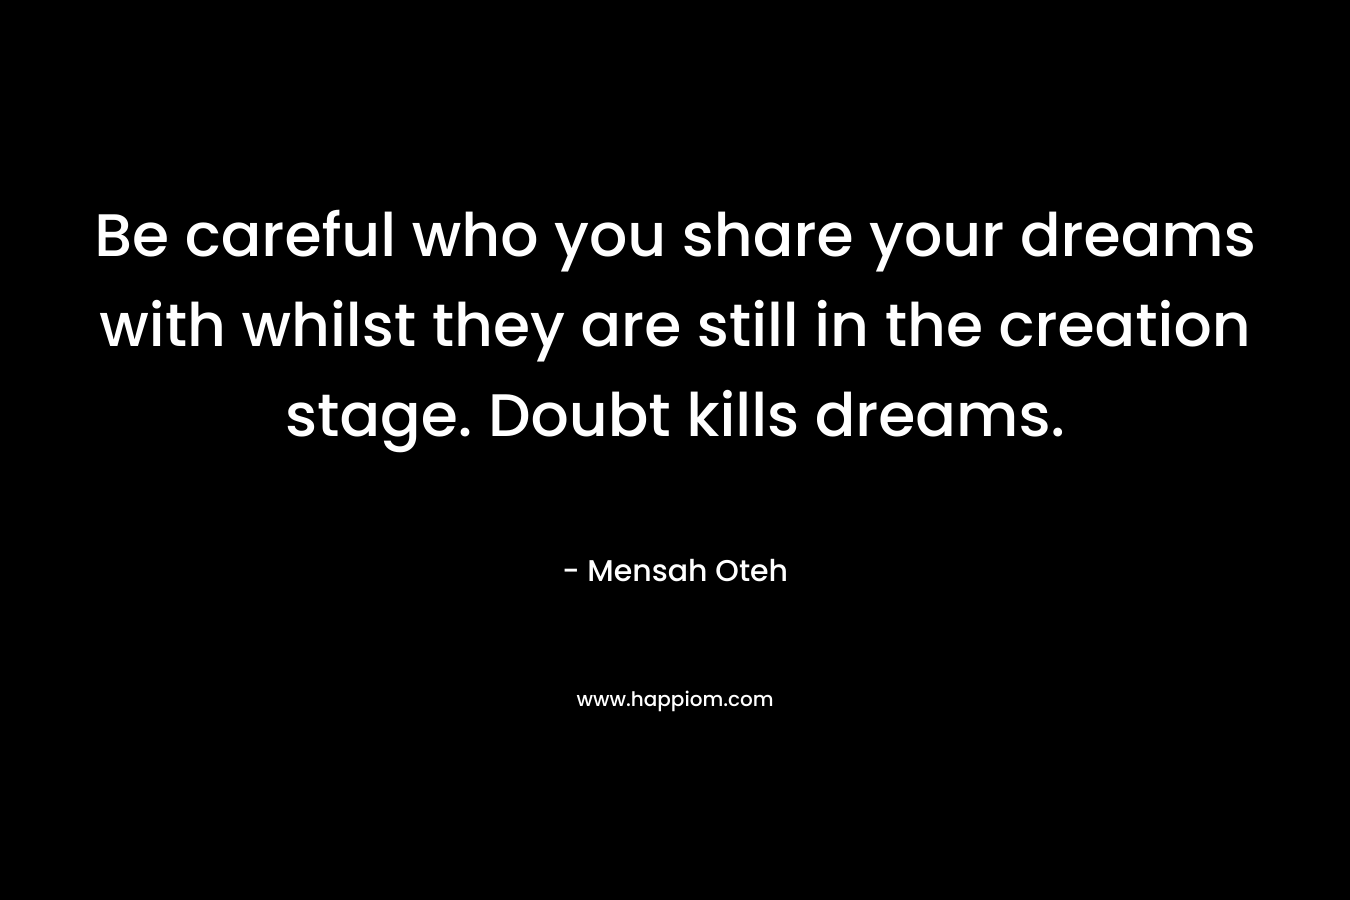 Be careful who you share your dreams with whilst they are still in the creation stage. Doubt kills dreams.